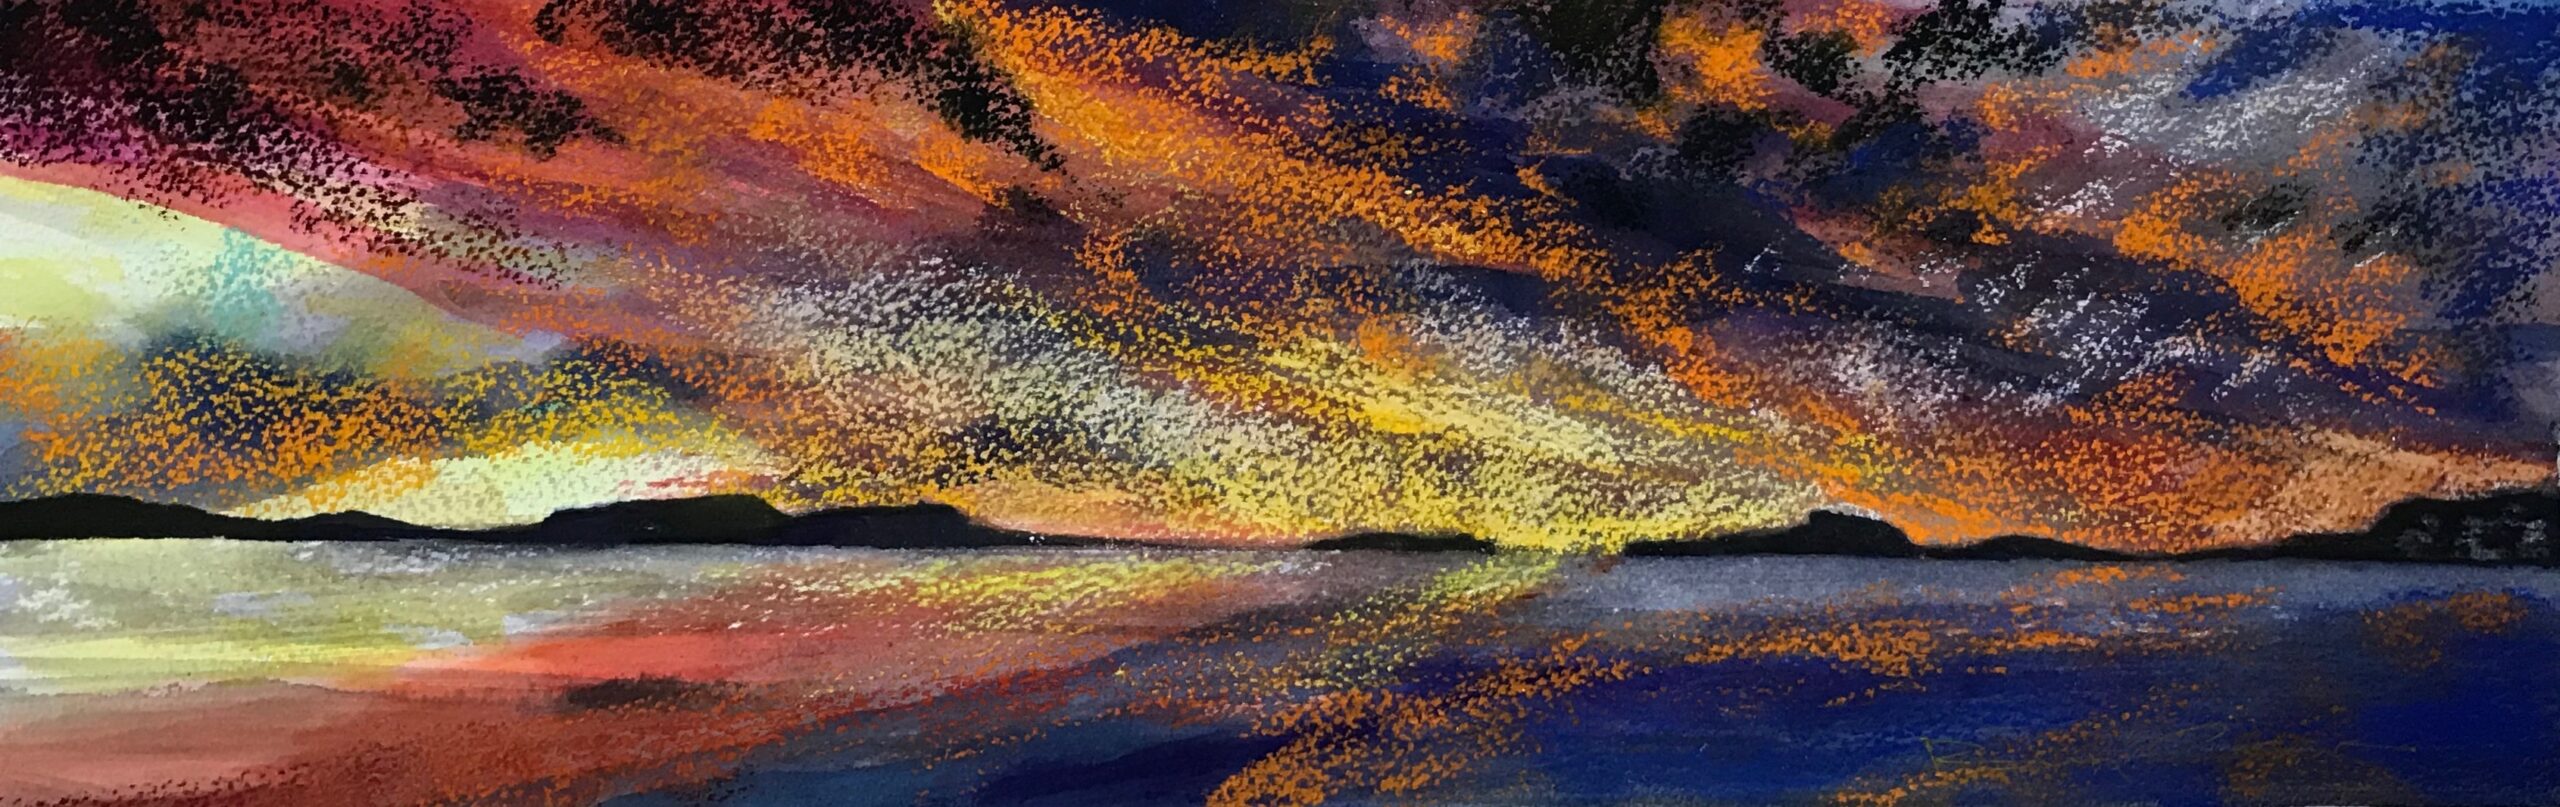 Sky on Fire, Still Waters, 2019 - Beverley Coleclough